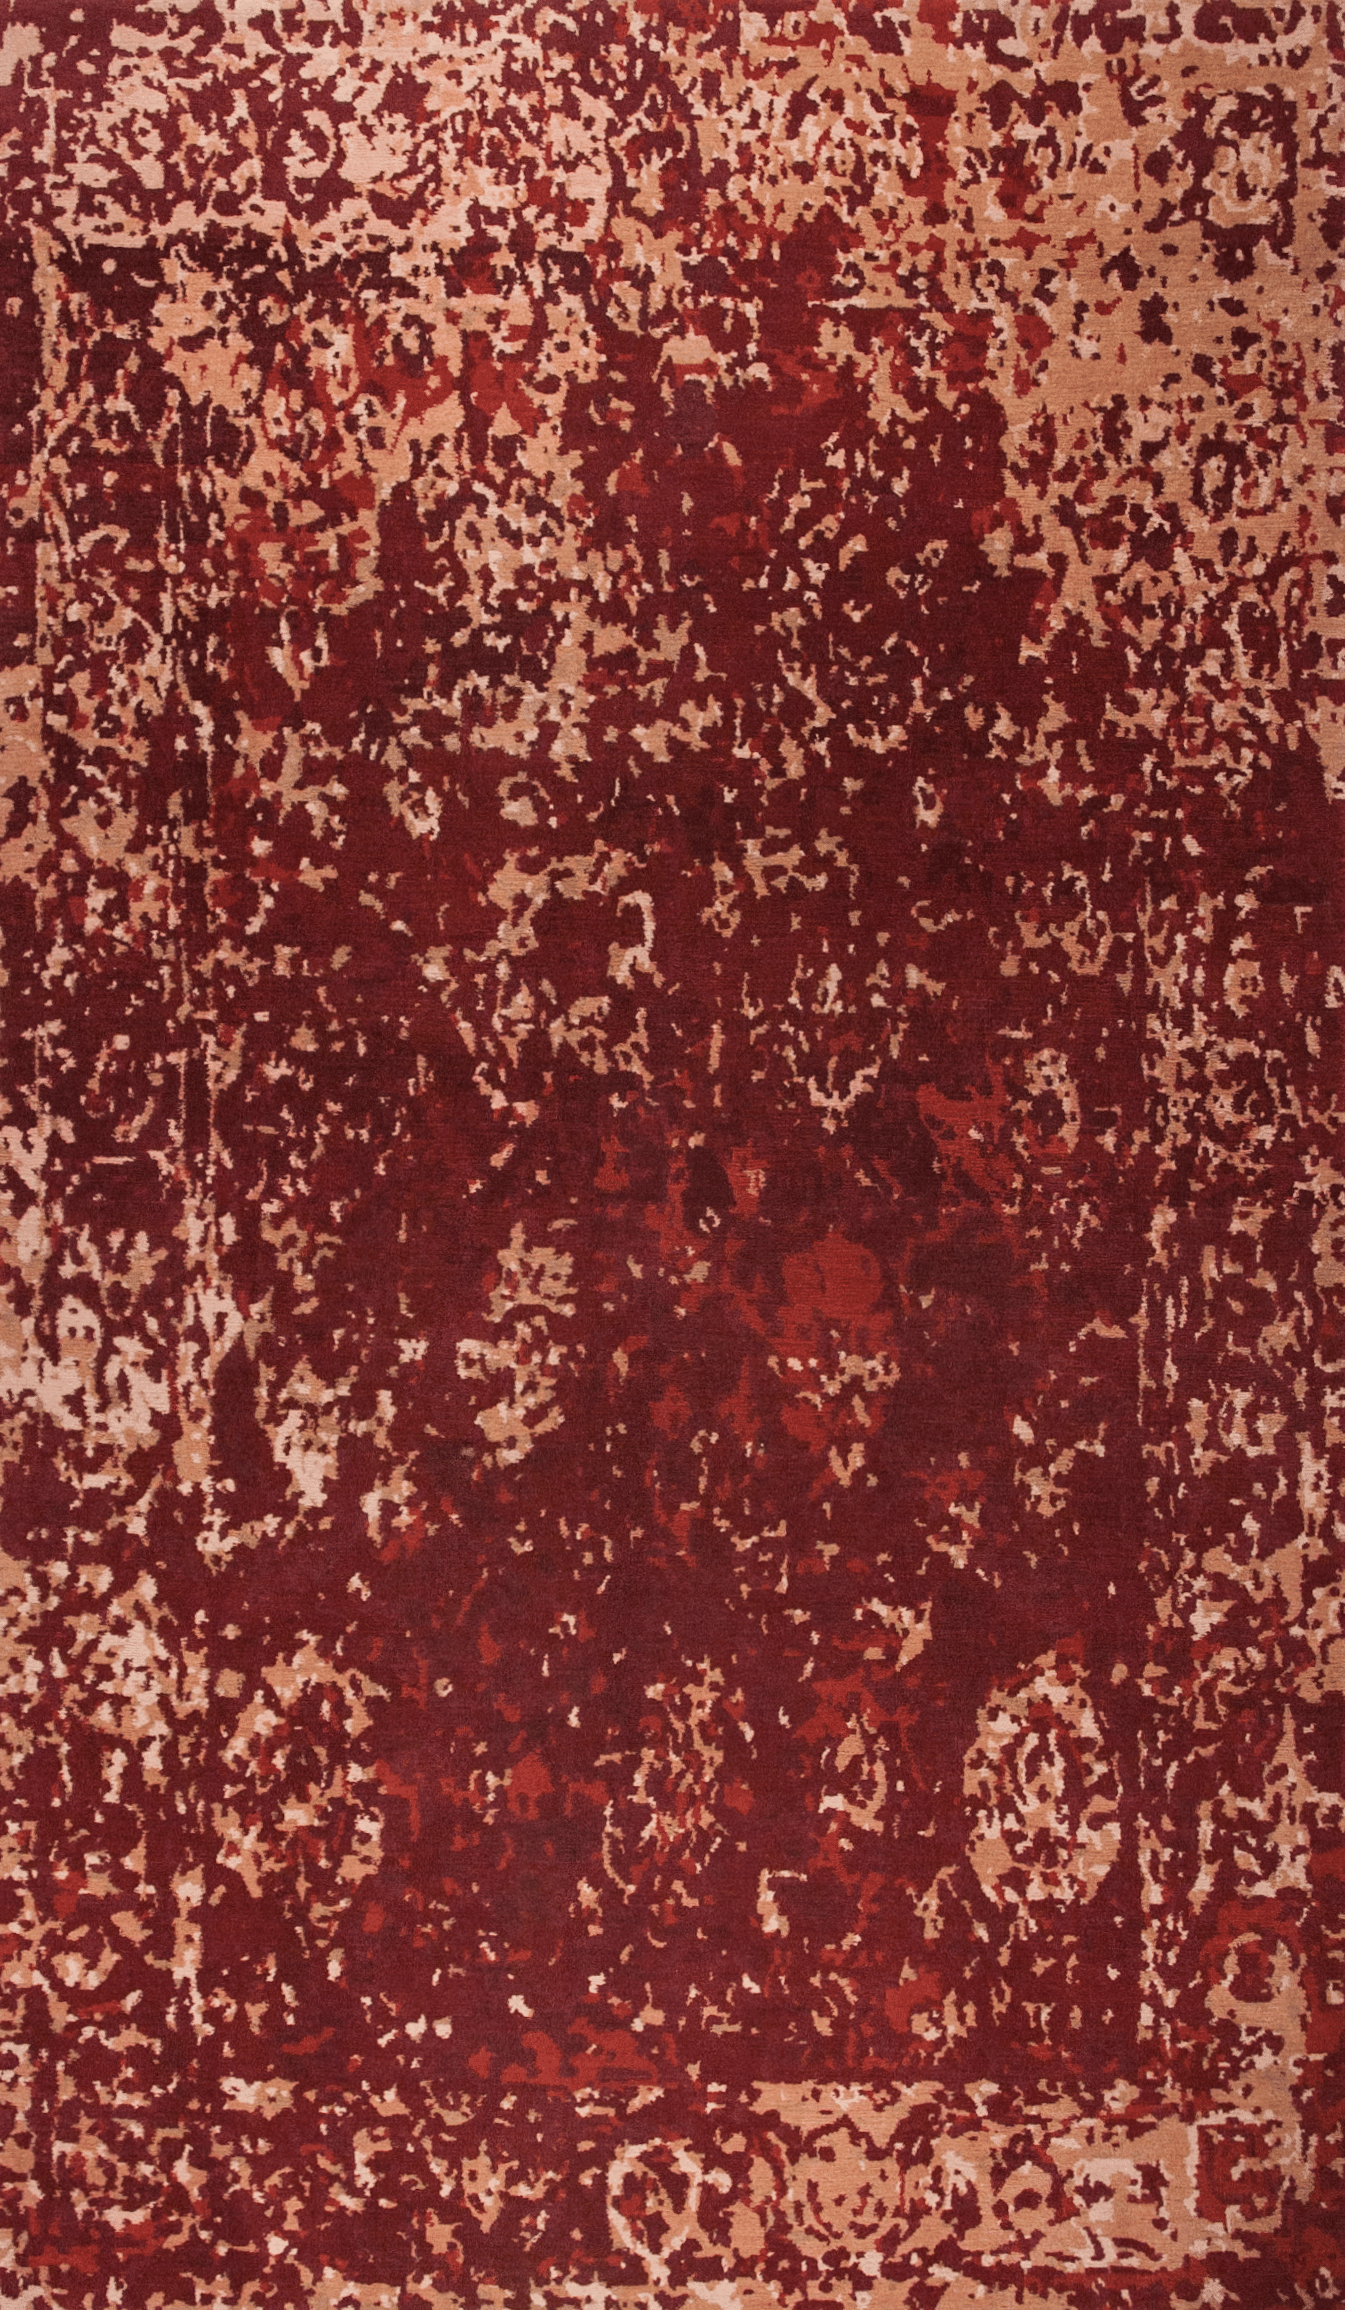 Geba carpet "Antique red" in different shaed of red and beige, abstract design of a classic carpet, from Nepal, 100 knot, 100% sheep's wool - product picture - Geba carpet